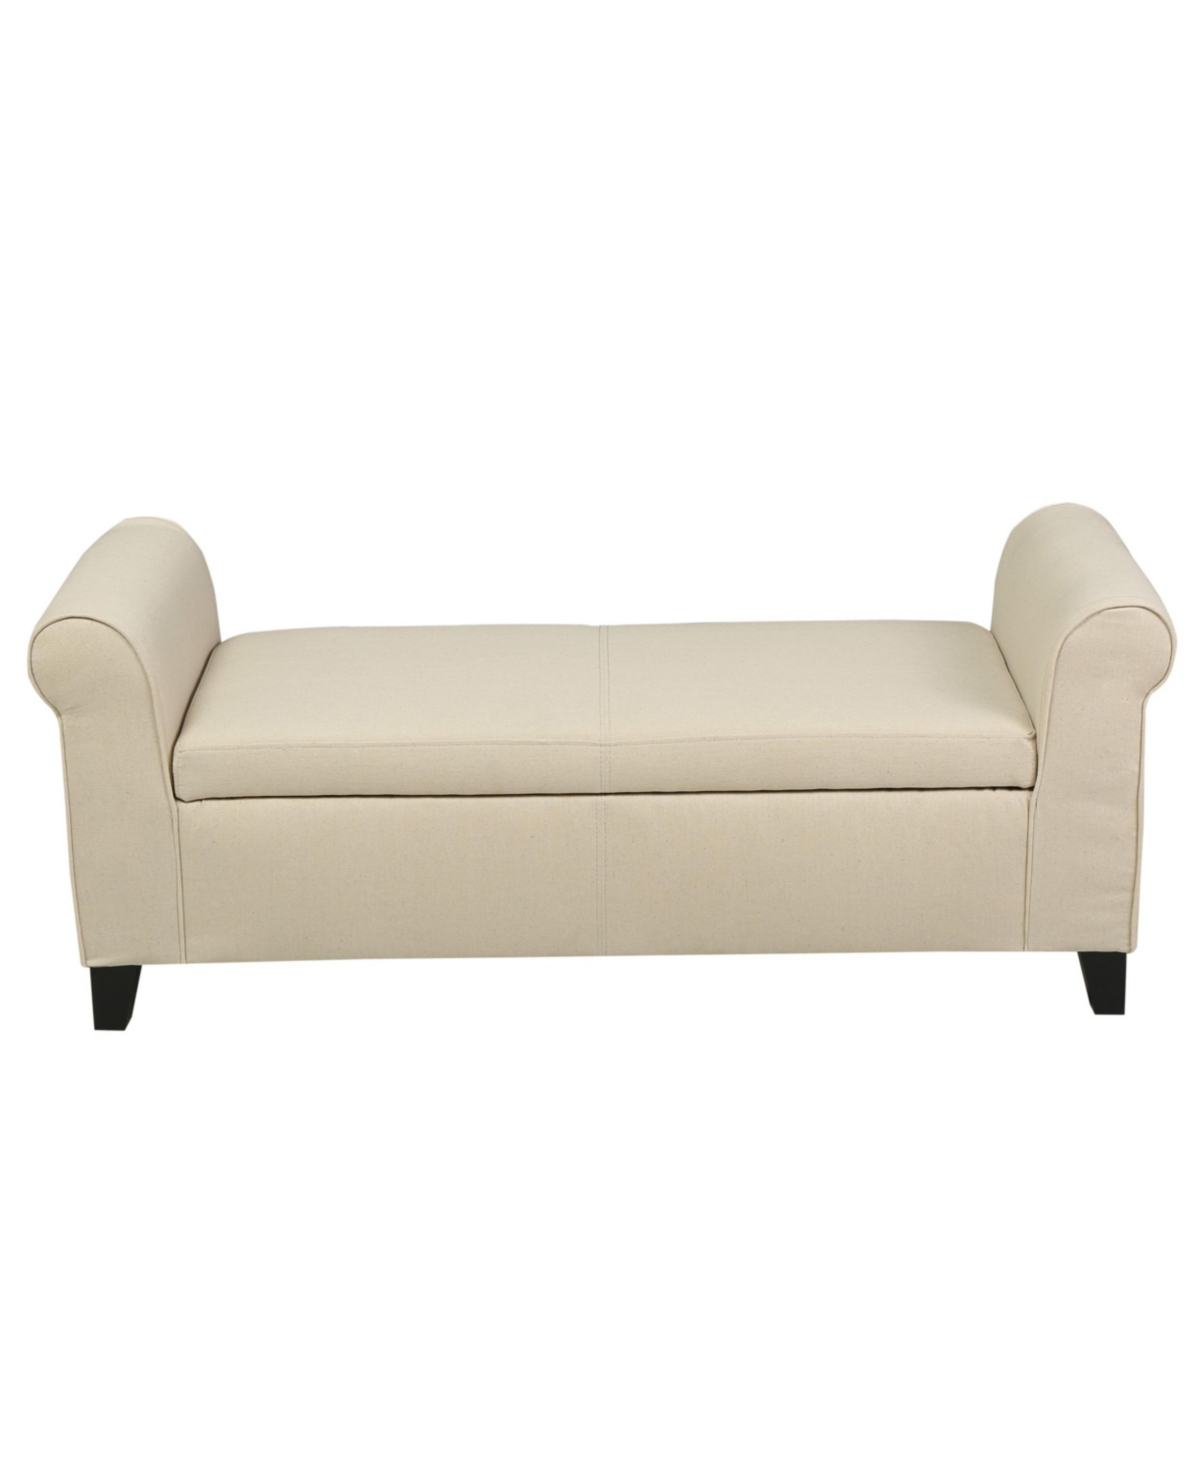 Noble House Hayes Contemporary Upholstered Storage Ottoman Bench With Rolled Arms In Beige